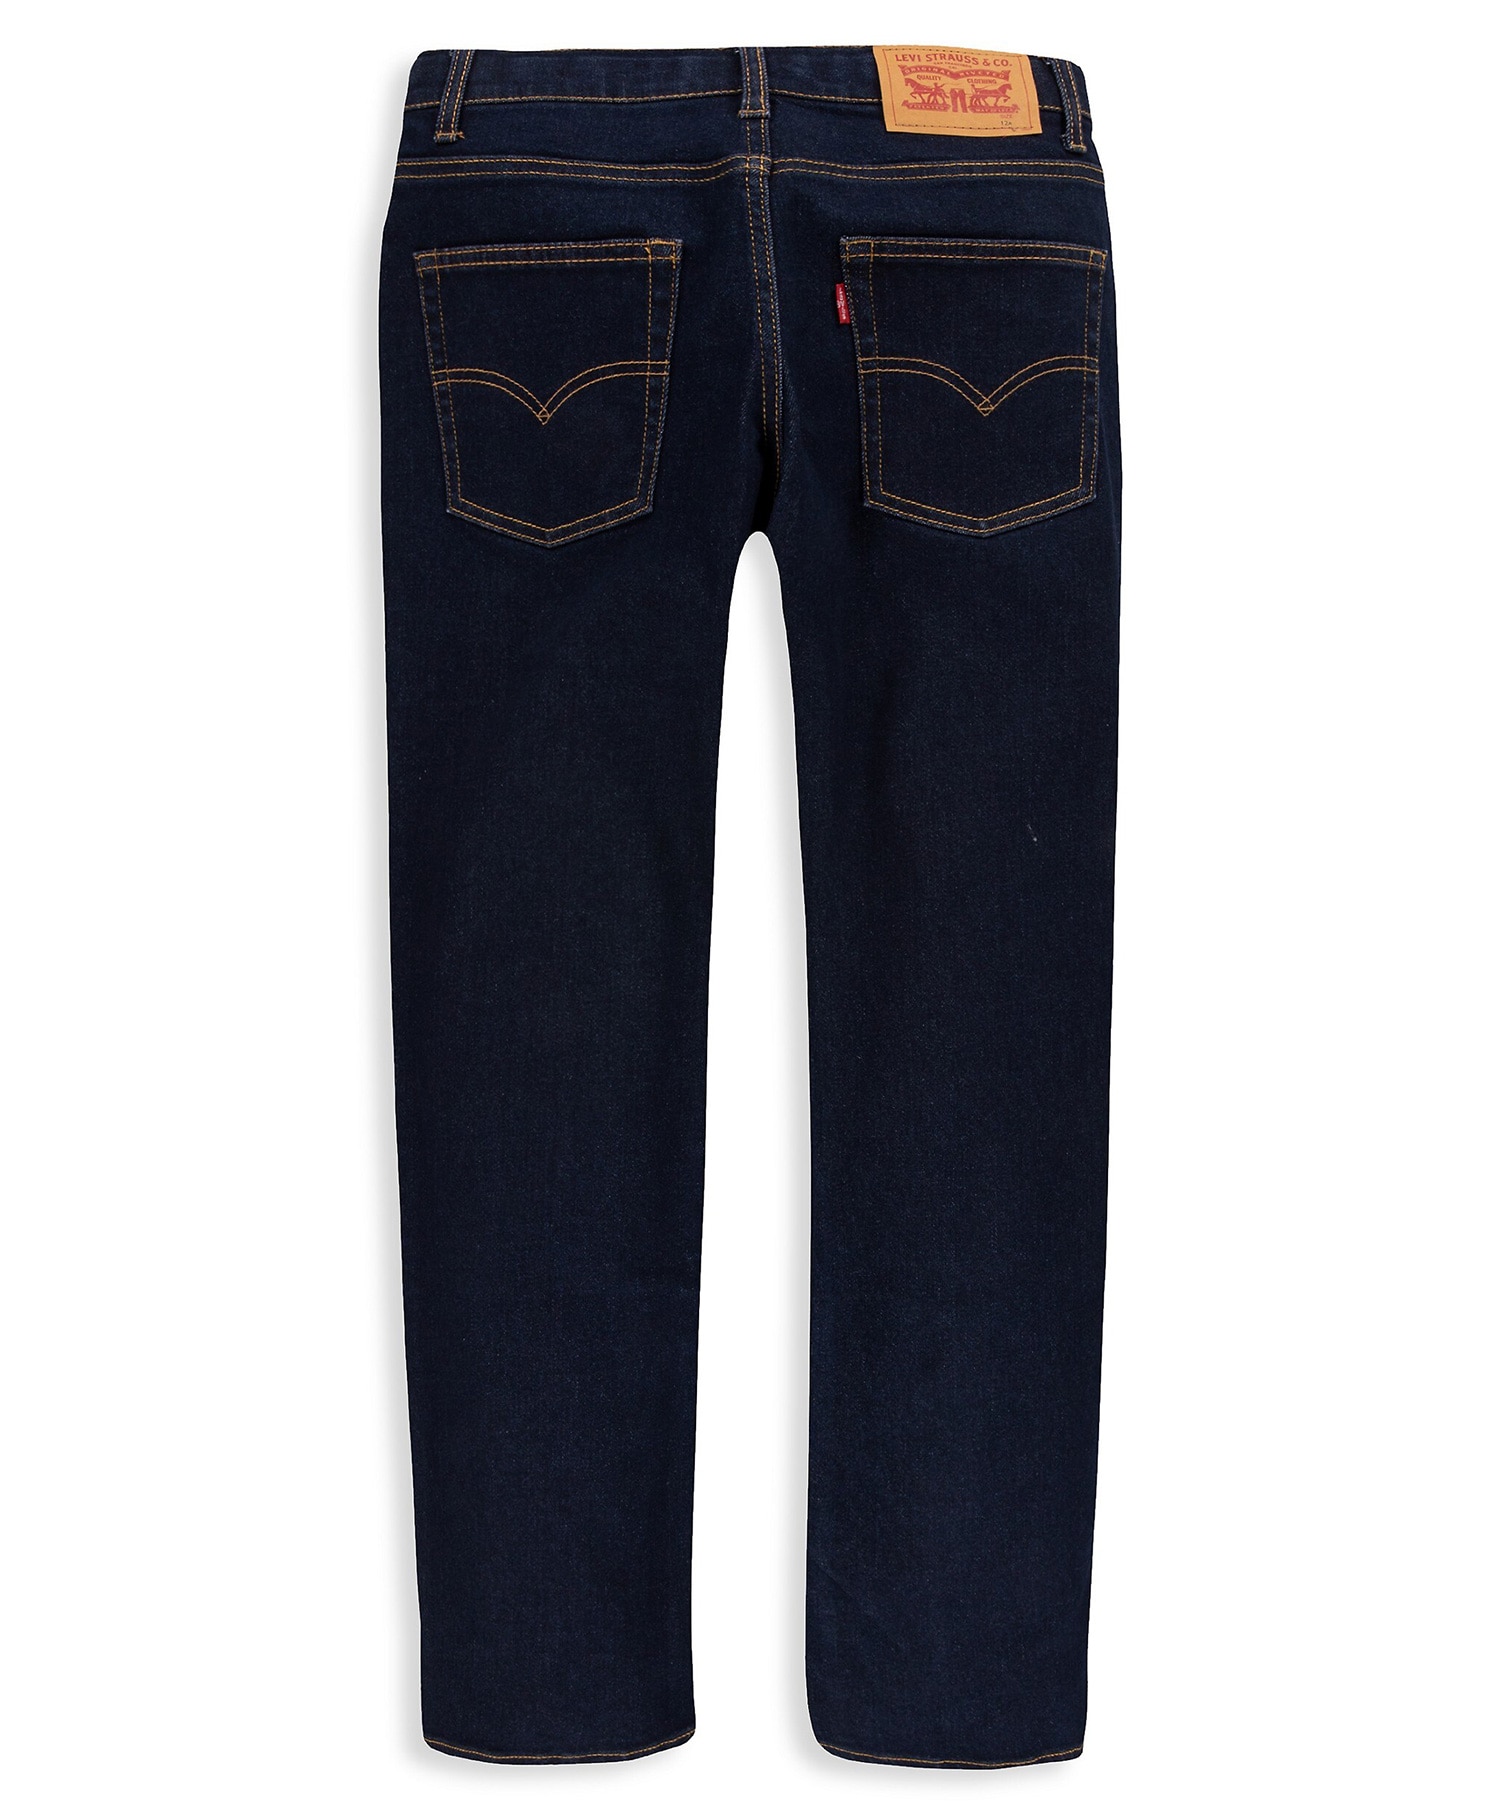 Levi's Stay Loose Taper Jeans